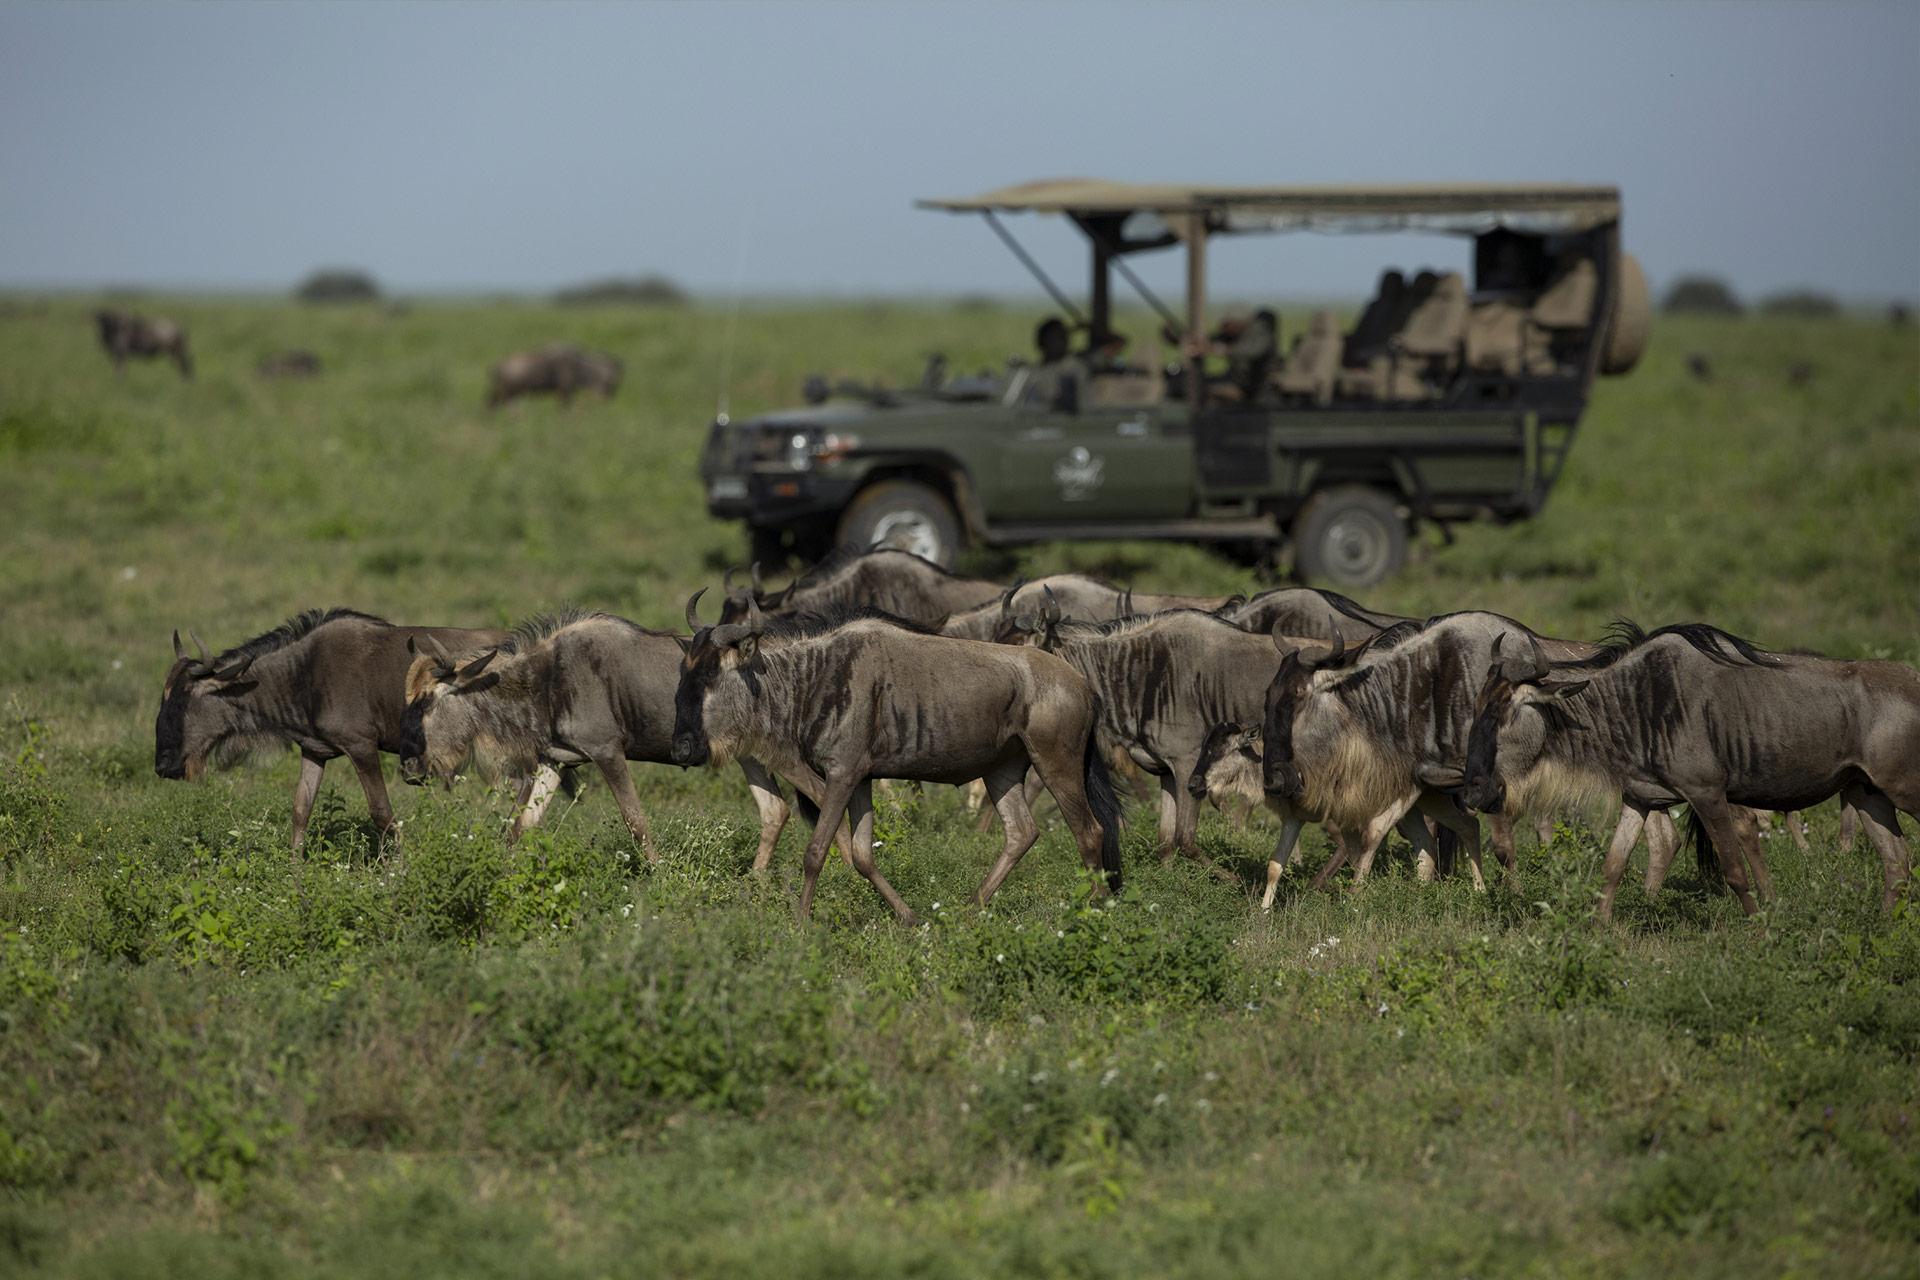 If there’s ever a time to visit us in Ndutu, it is now! 